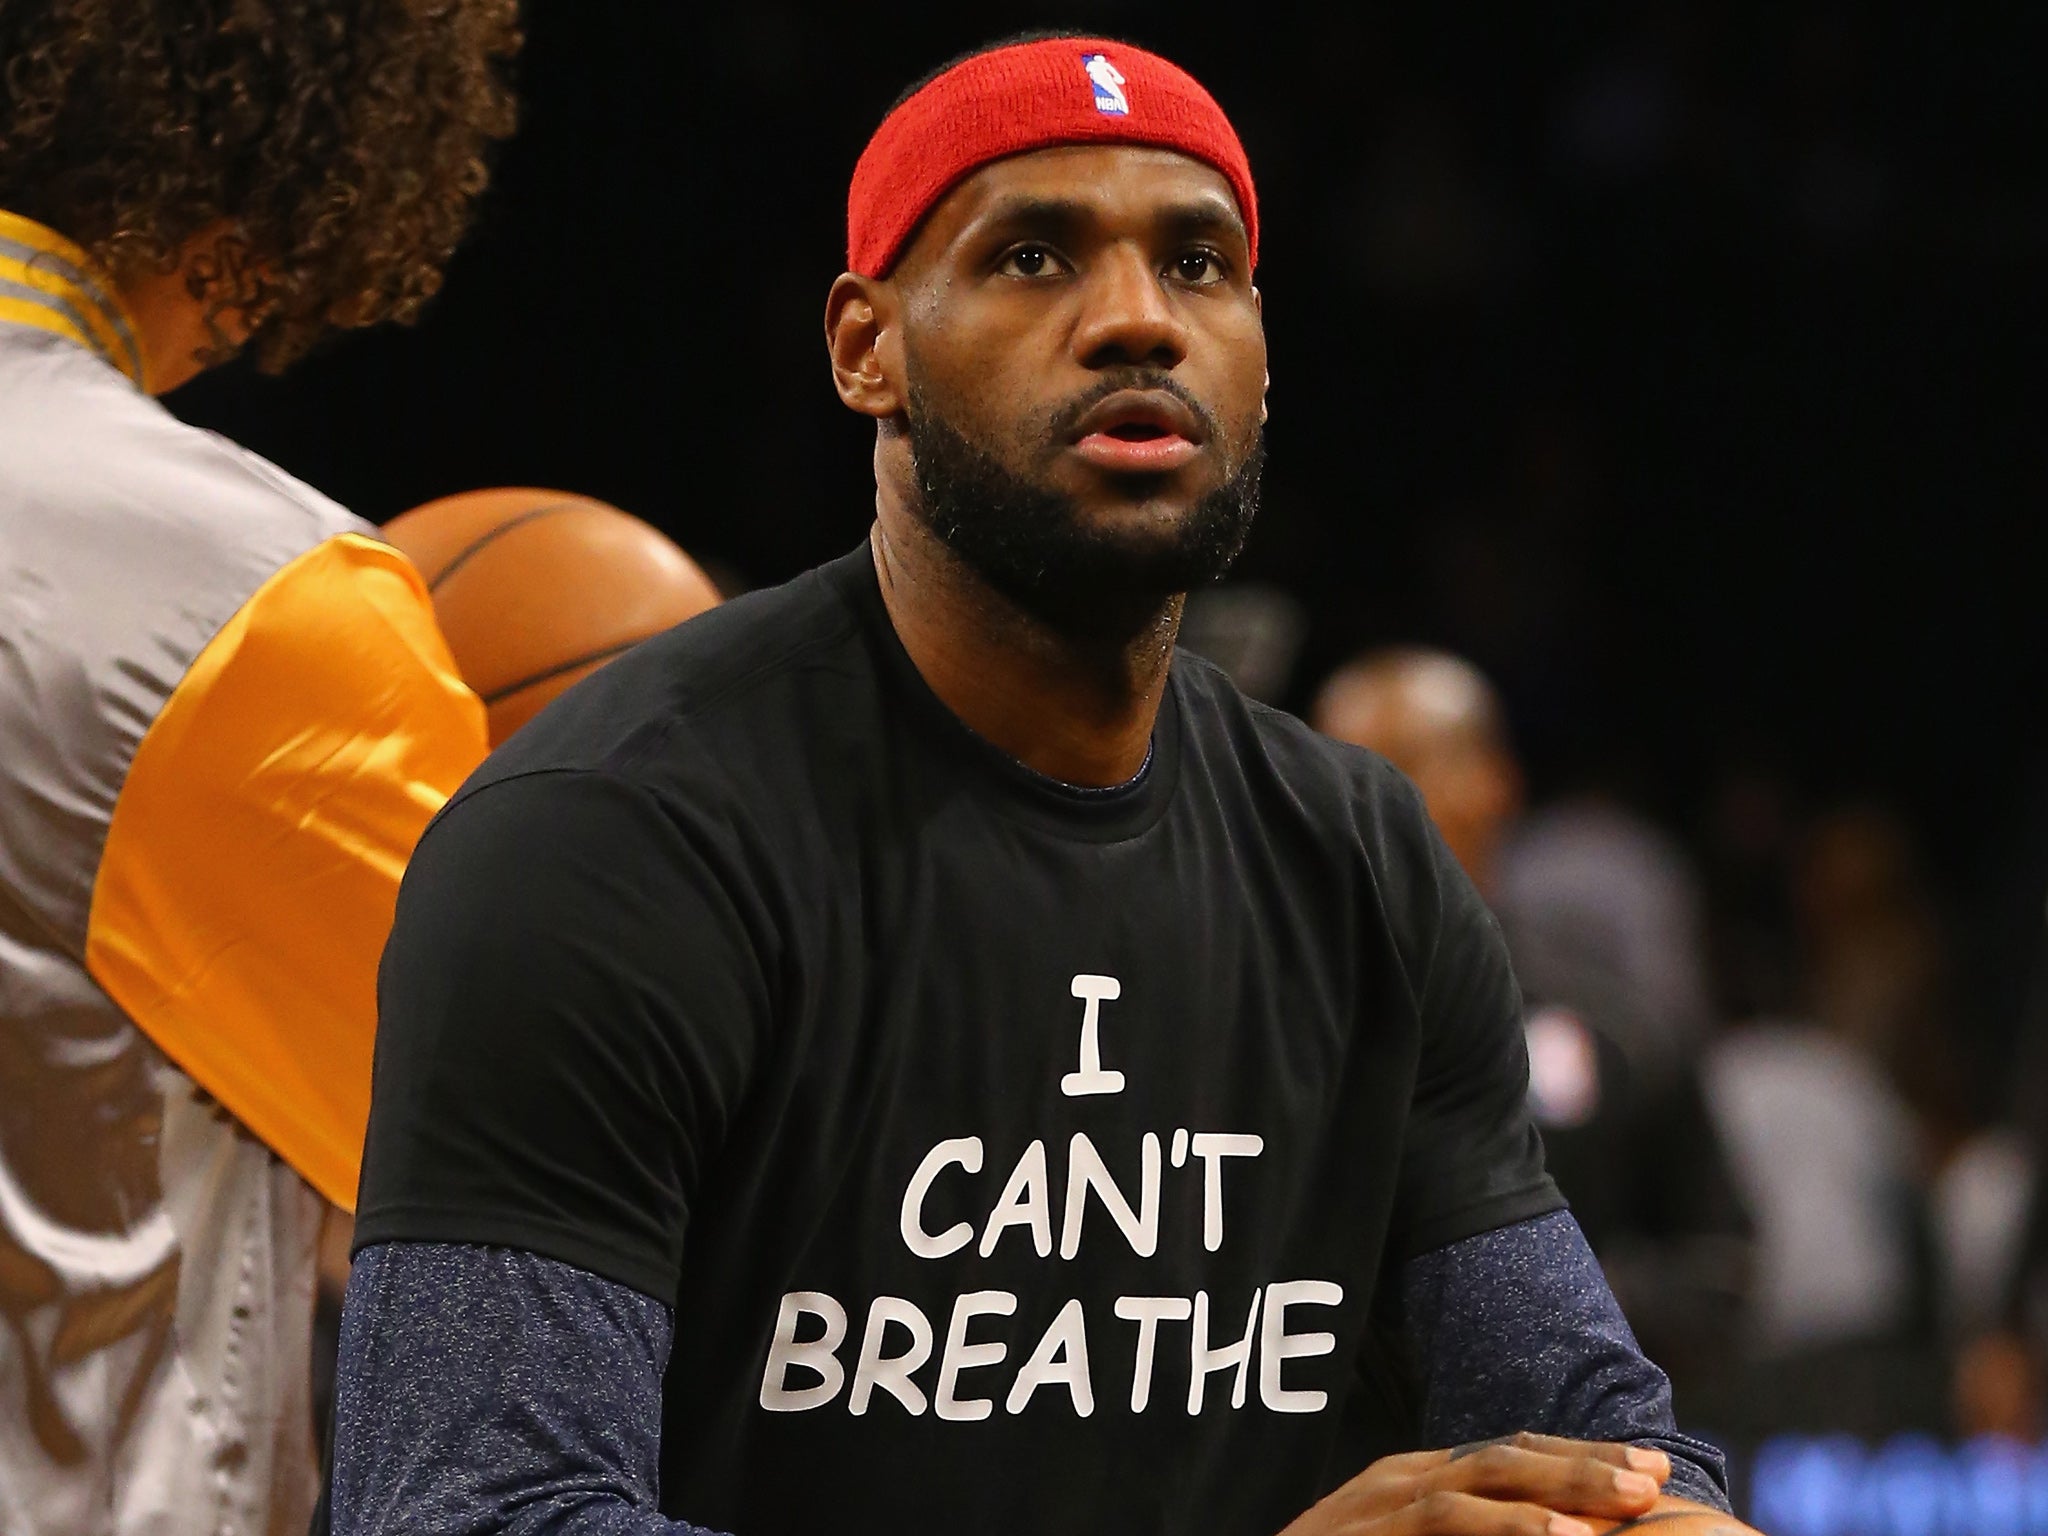 Derrick Rose explains why he wore 'I Can't Breathe' shirt 